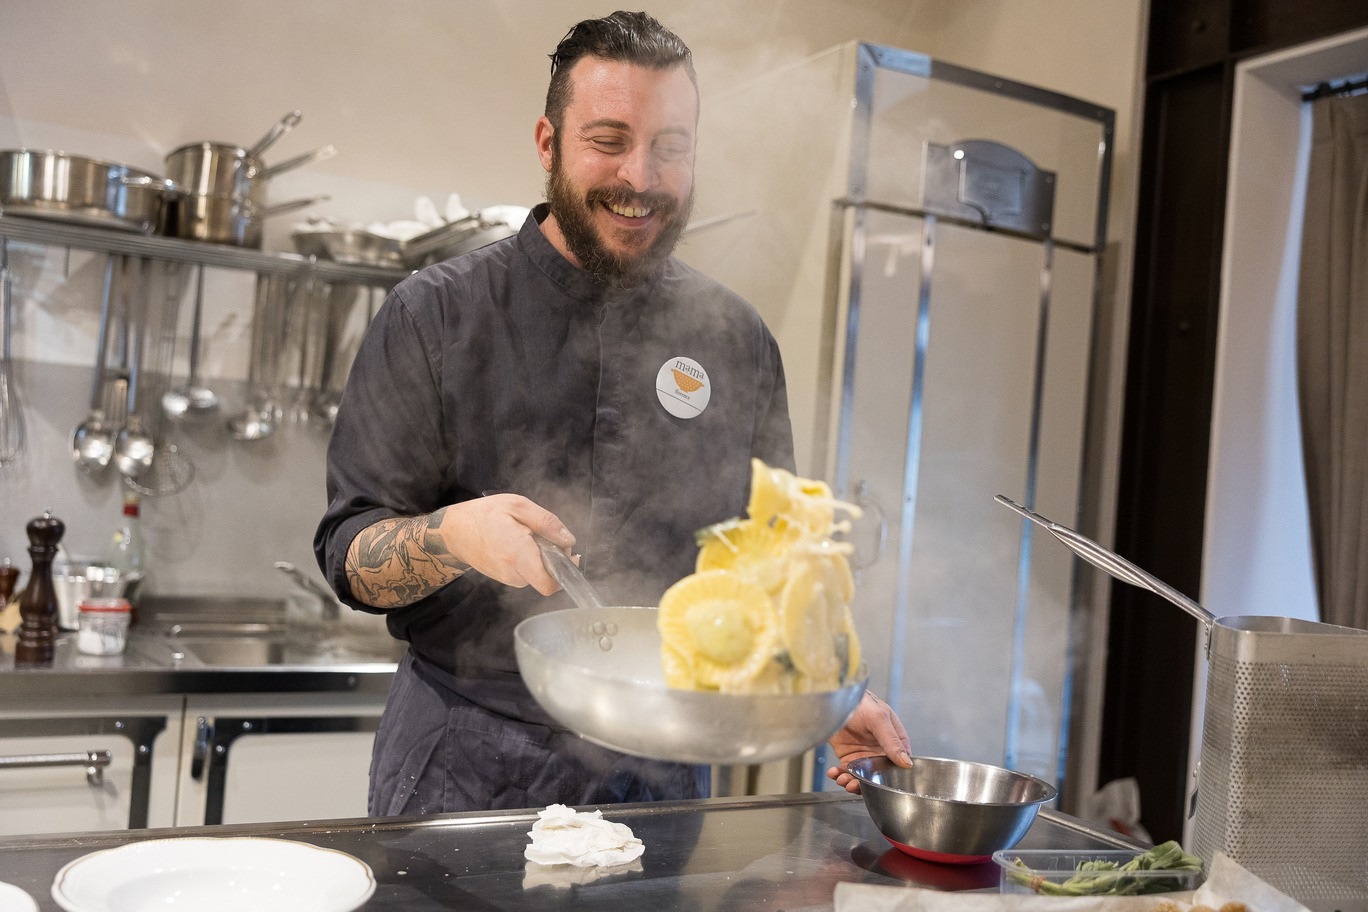 Tuscan Tradition Cooking School